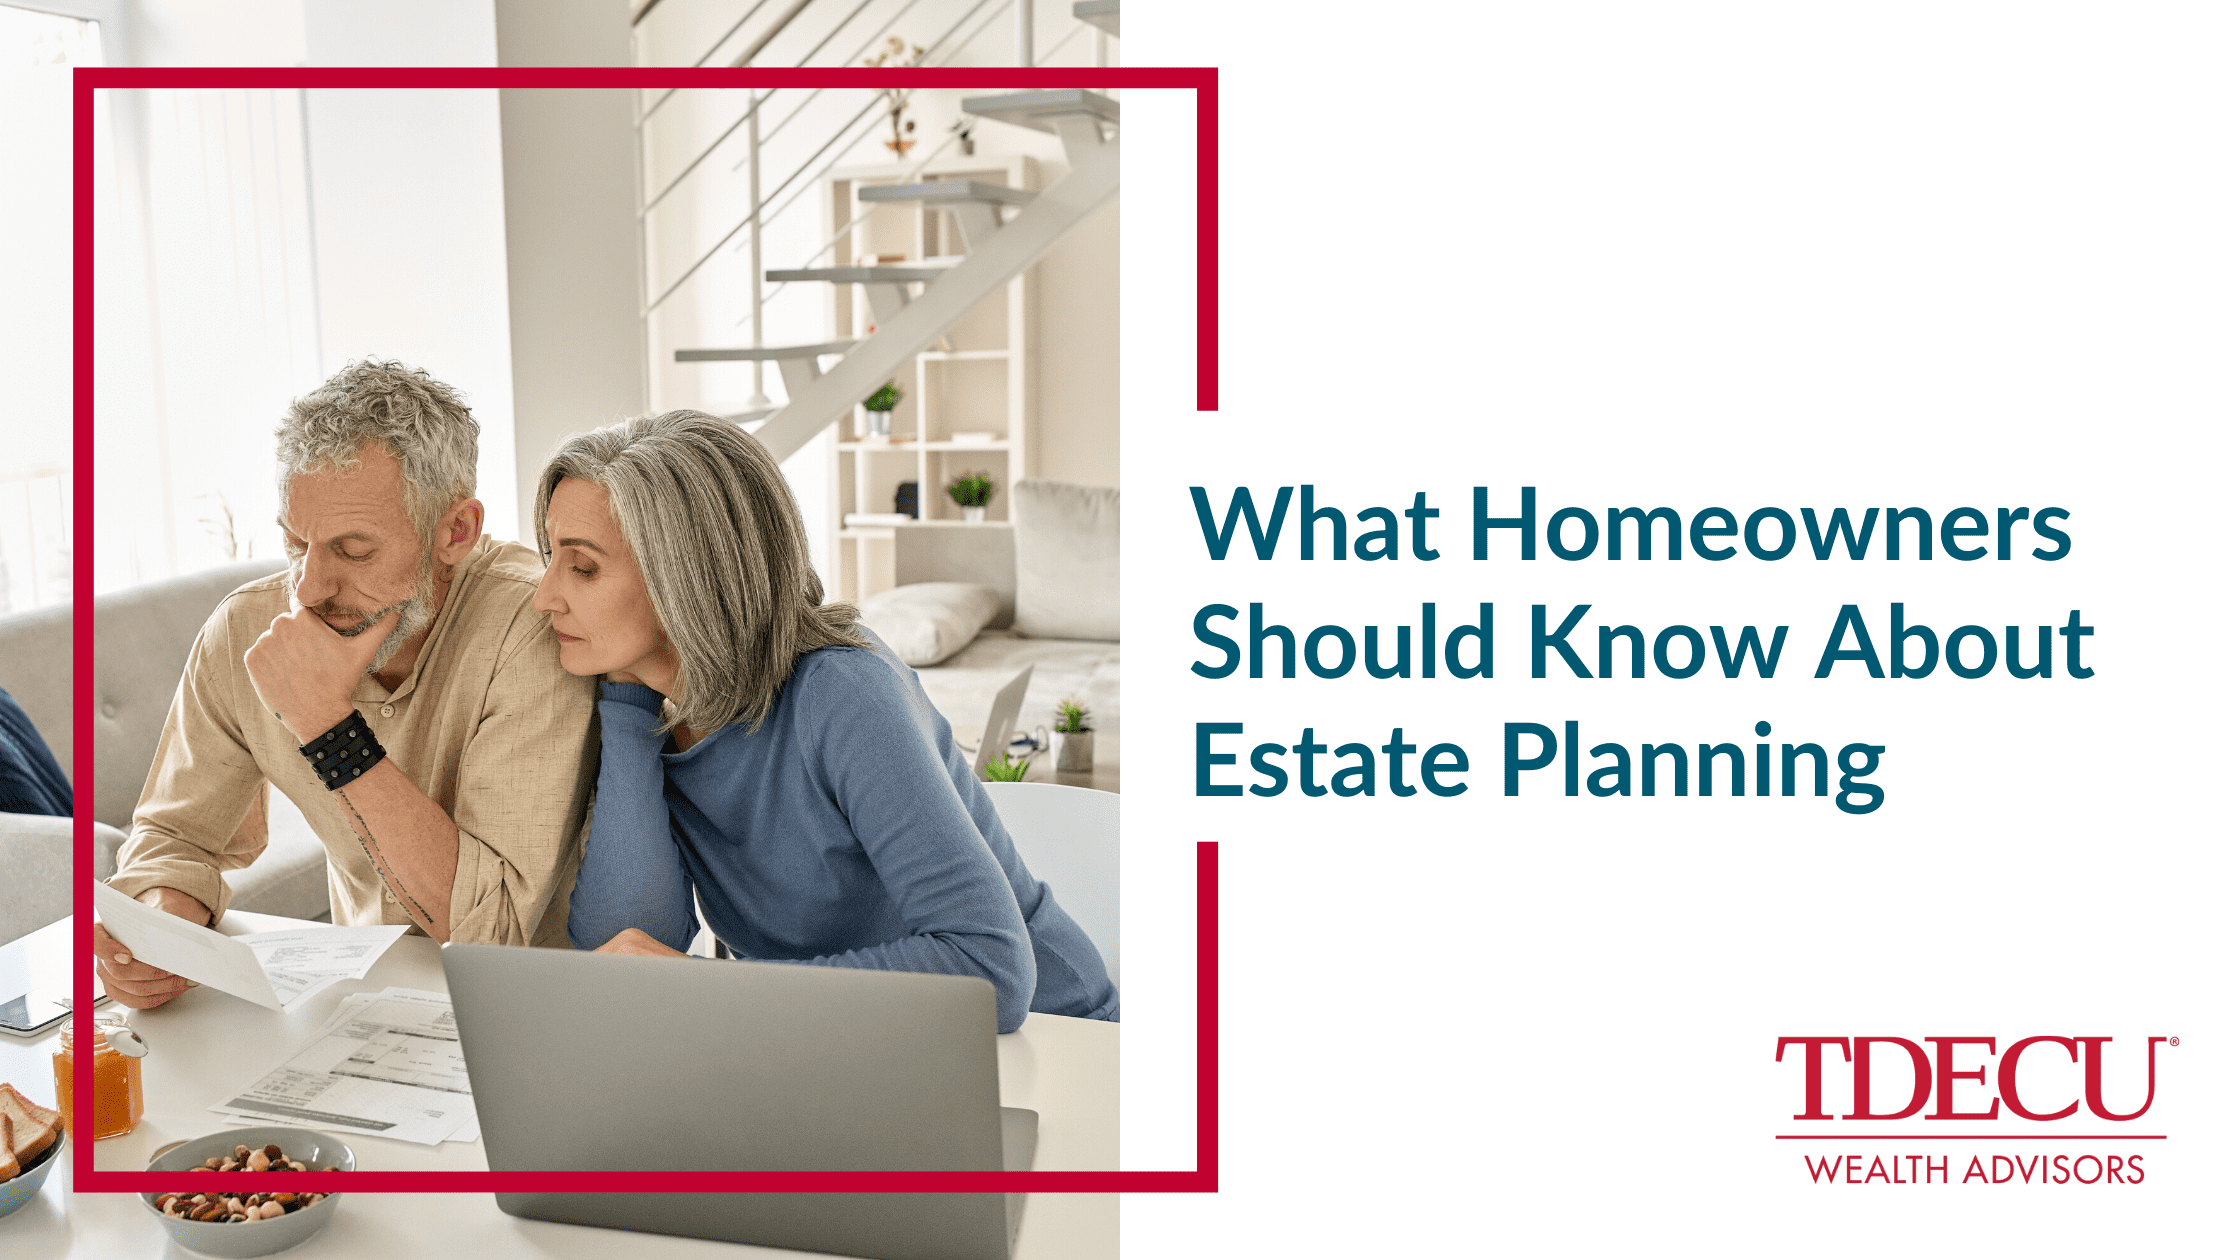 What Homeowners Should Know About Estate Planning